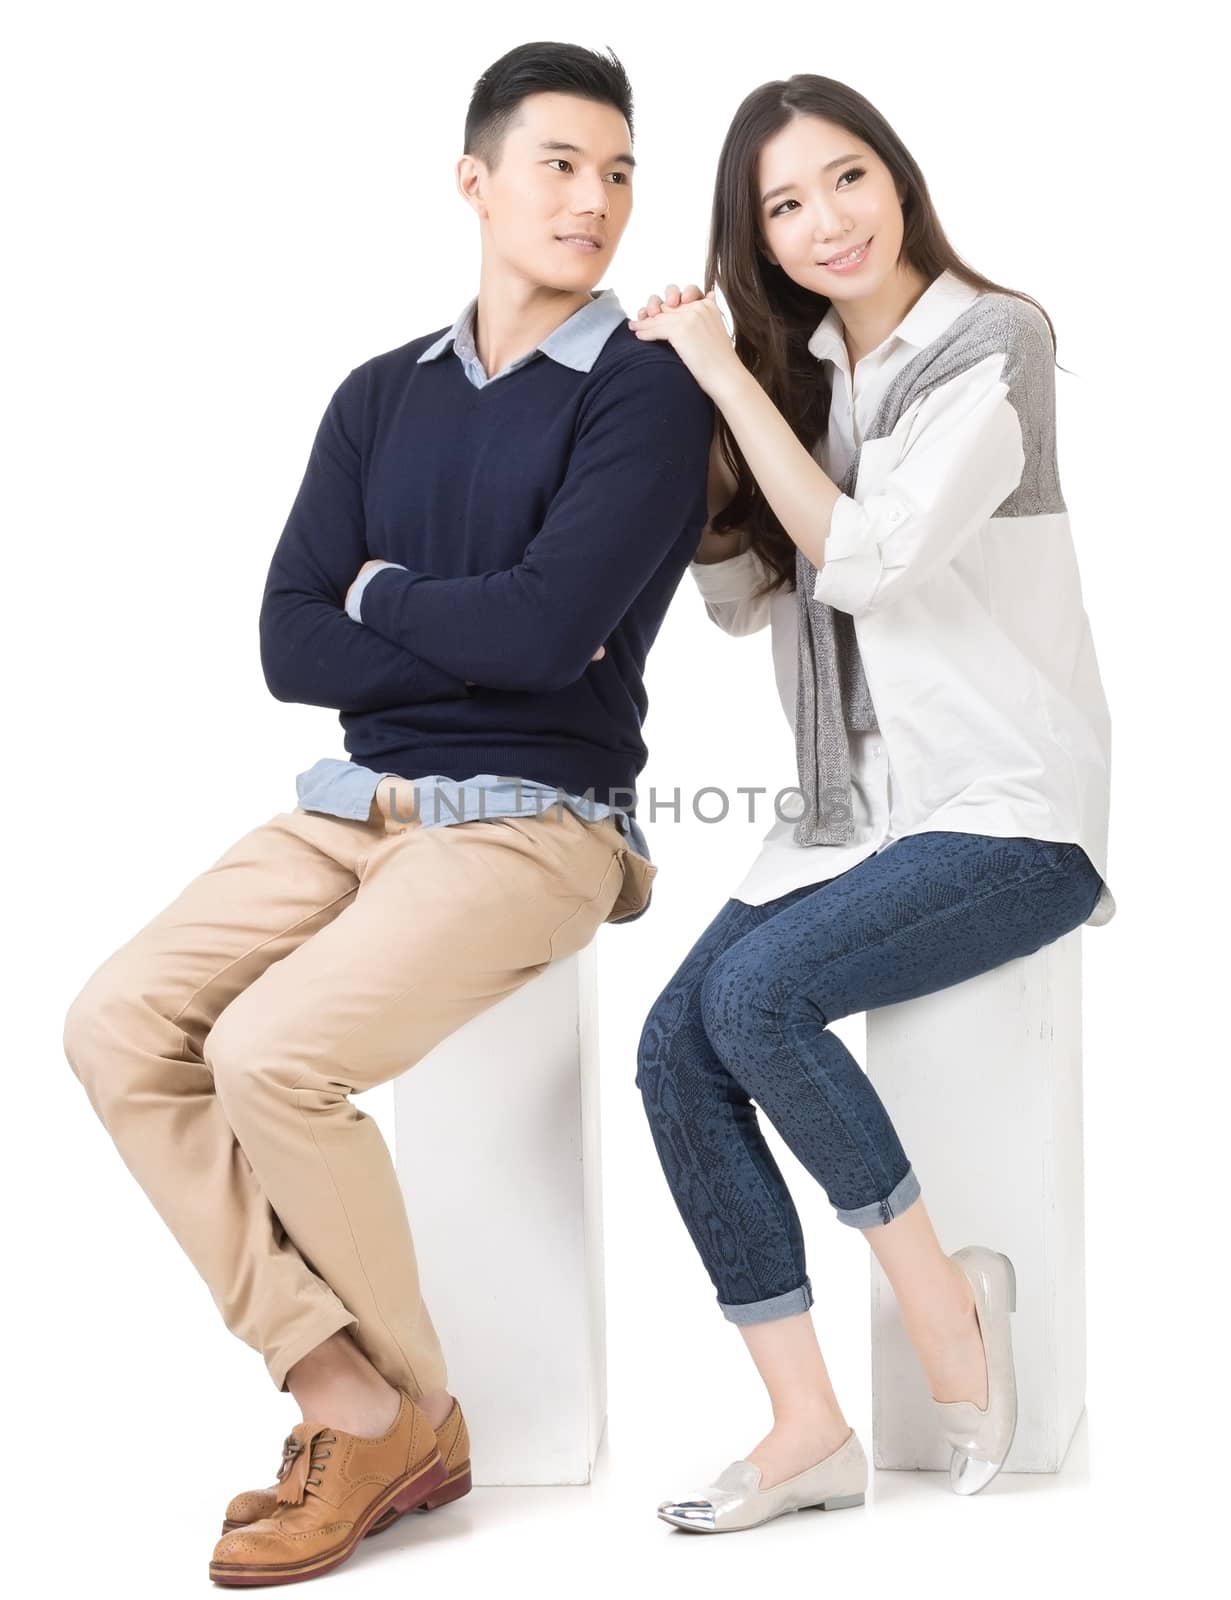 Portrait of young attractive Asian couple sitting on a box, full length portrait isolated on white background.